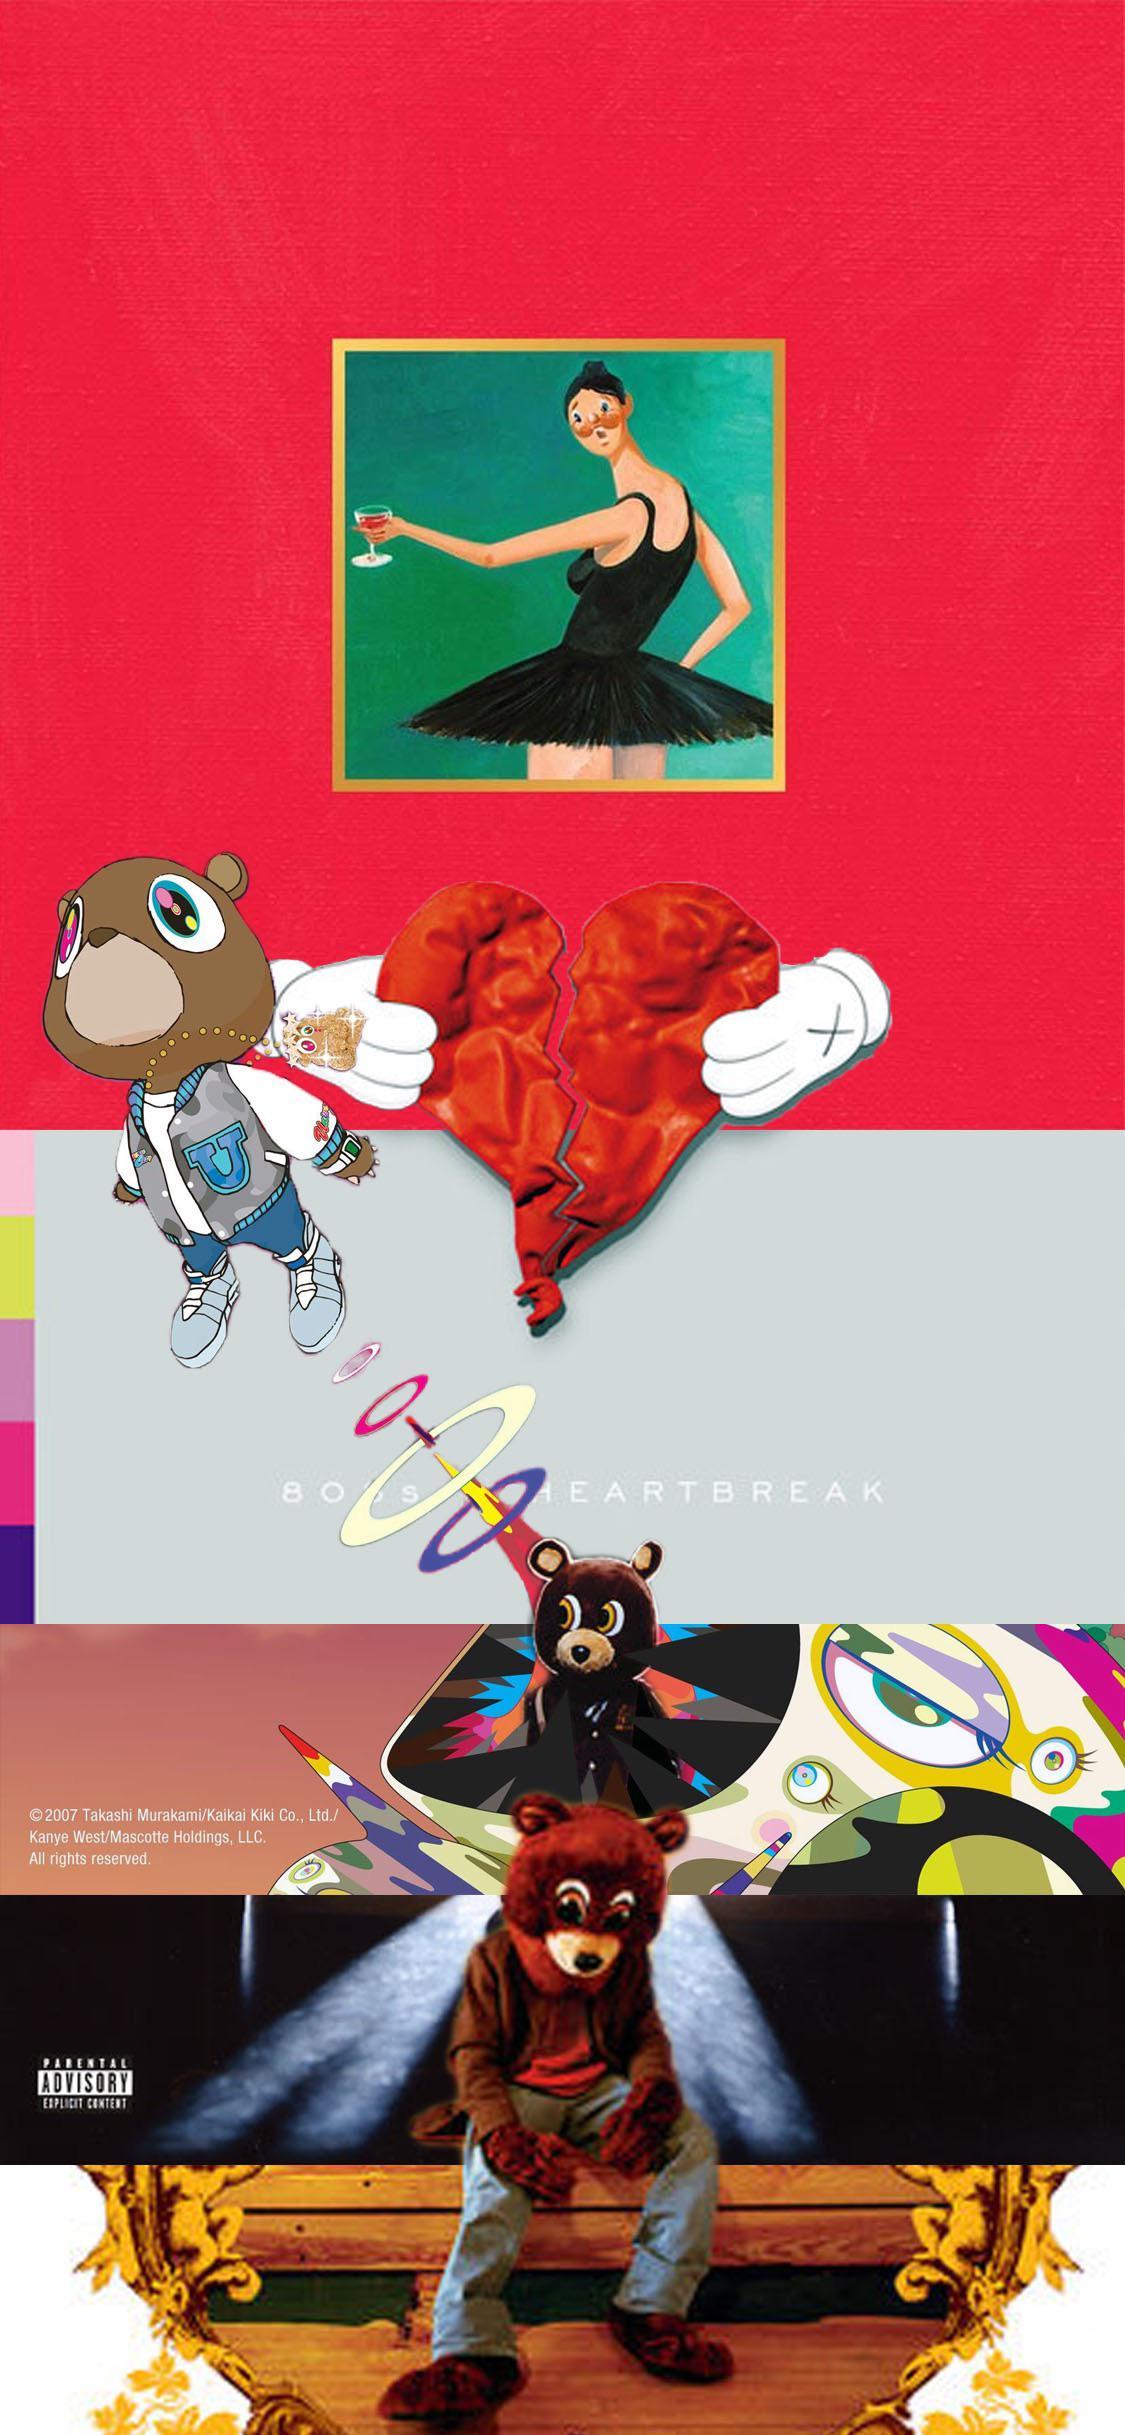 An iPhone wallpaper I made of the first albums rKanye